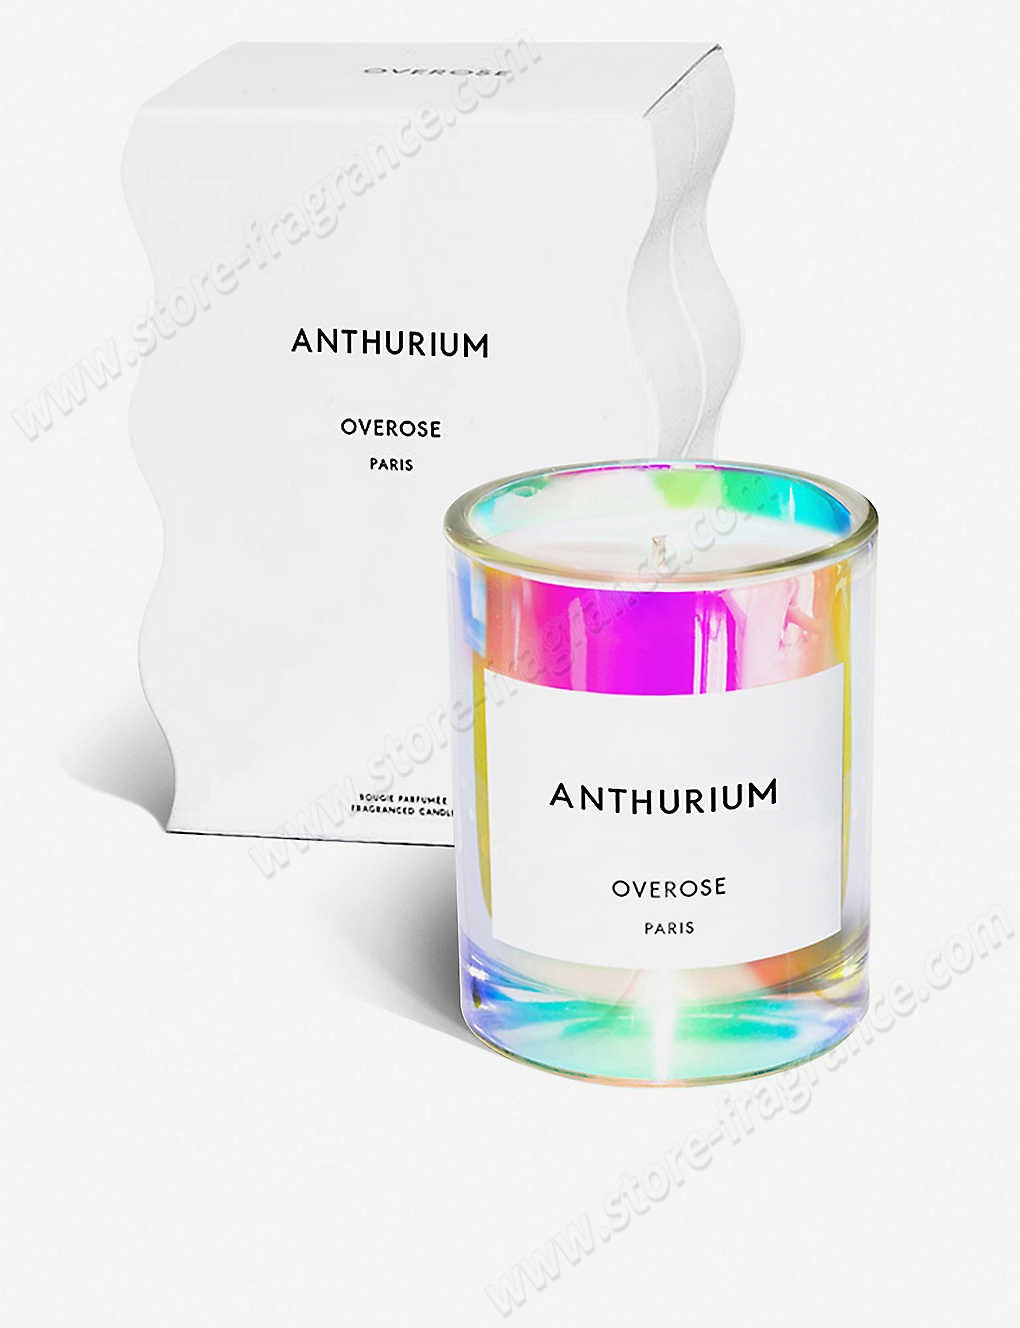 OVEROSE/Anthurium holographic scented candle 220g ✿ Discount Store - OVEROSE/Anthurium holographic scented candle 220g ✿ Discount Store